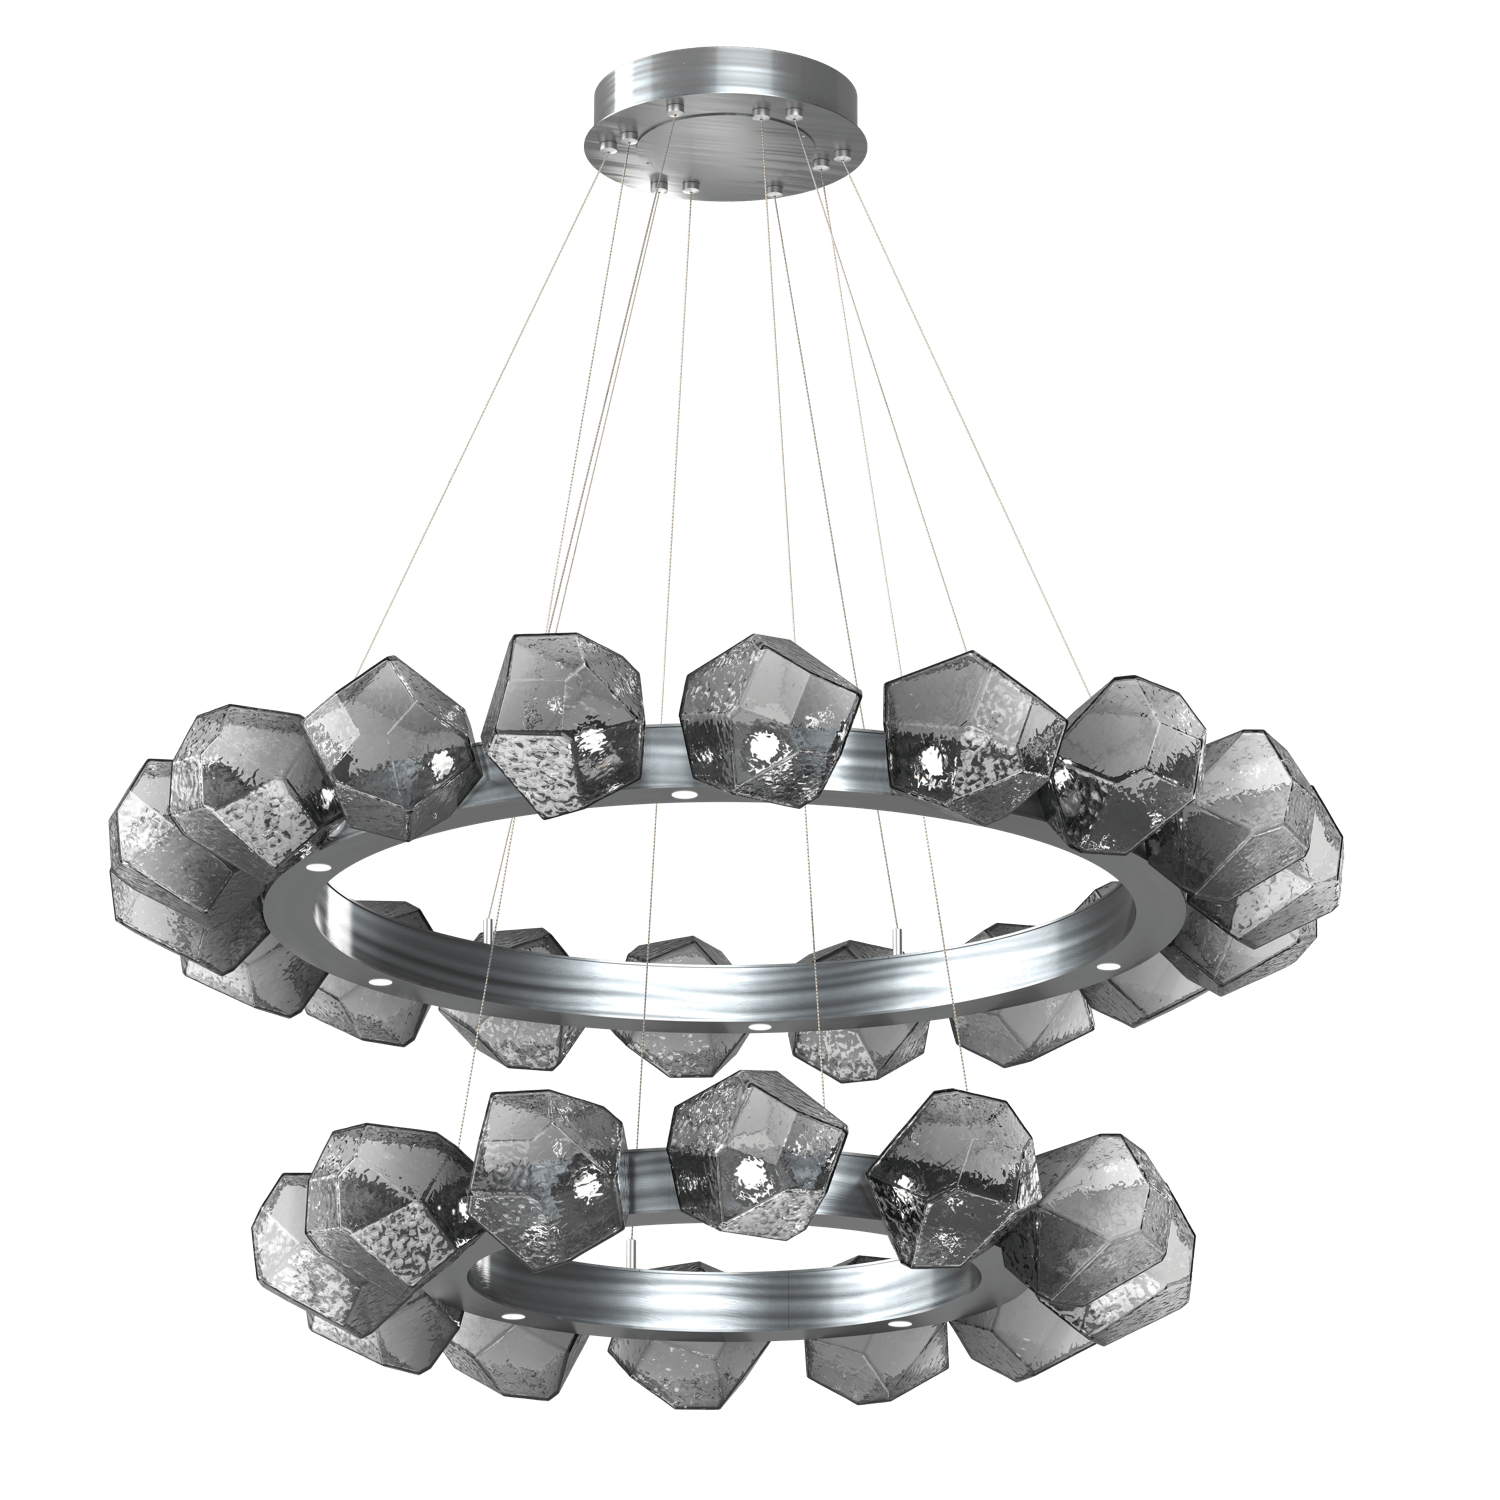 CHB0039-2T-SN-S-Hammerton-Studio-Gem-48-inch-two-tier-radial-ring-chandelier-with-satin-nickel-finish-and-smoke-blown-glass-shades-and-LED-lamping